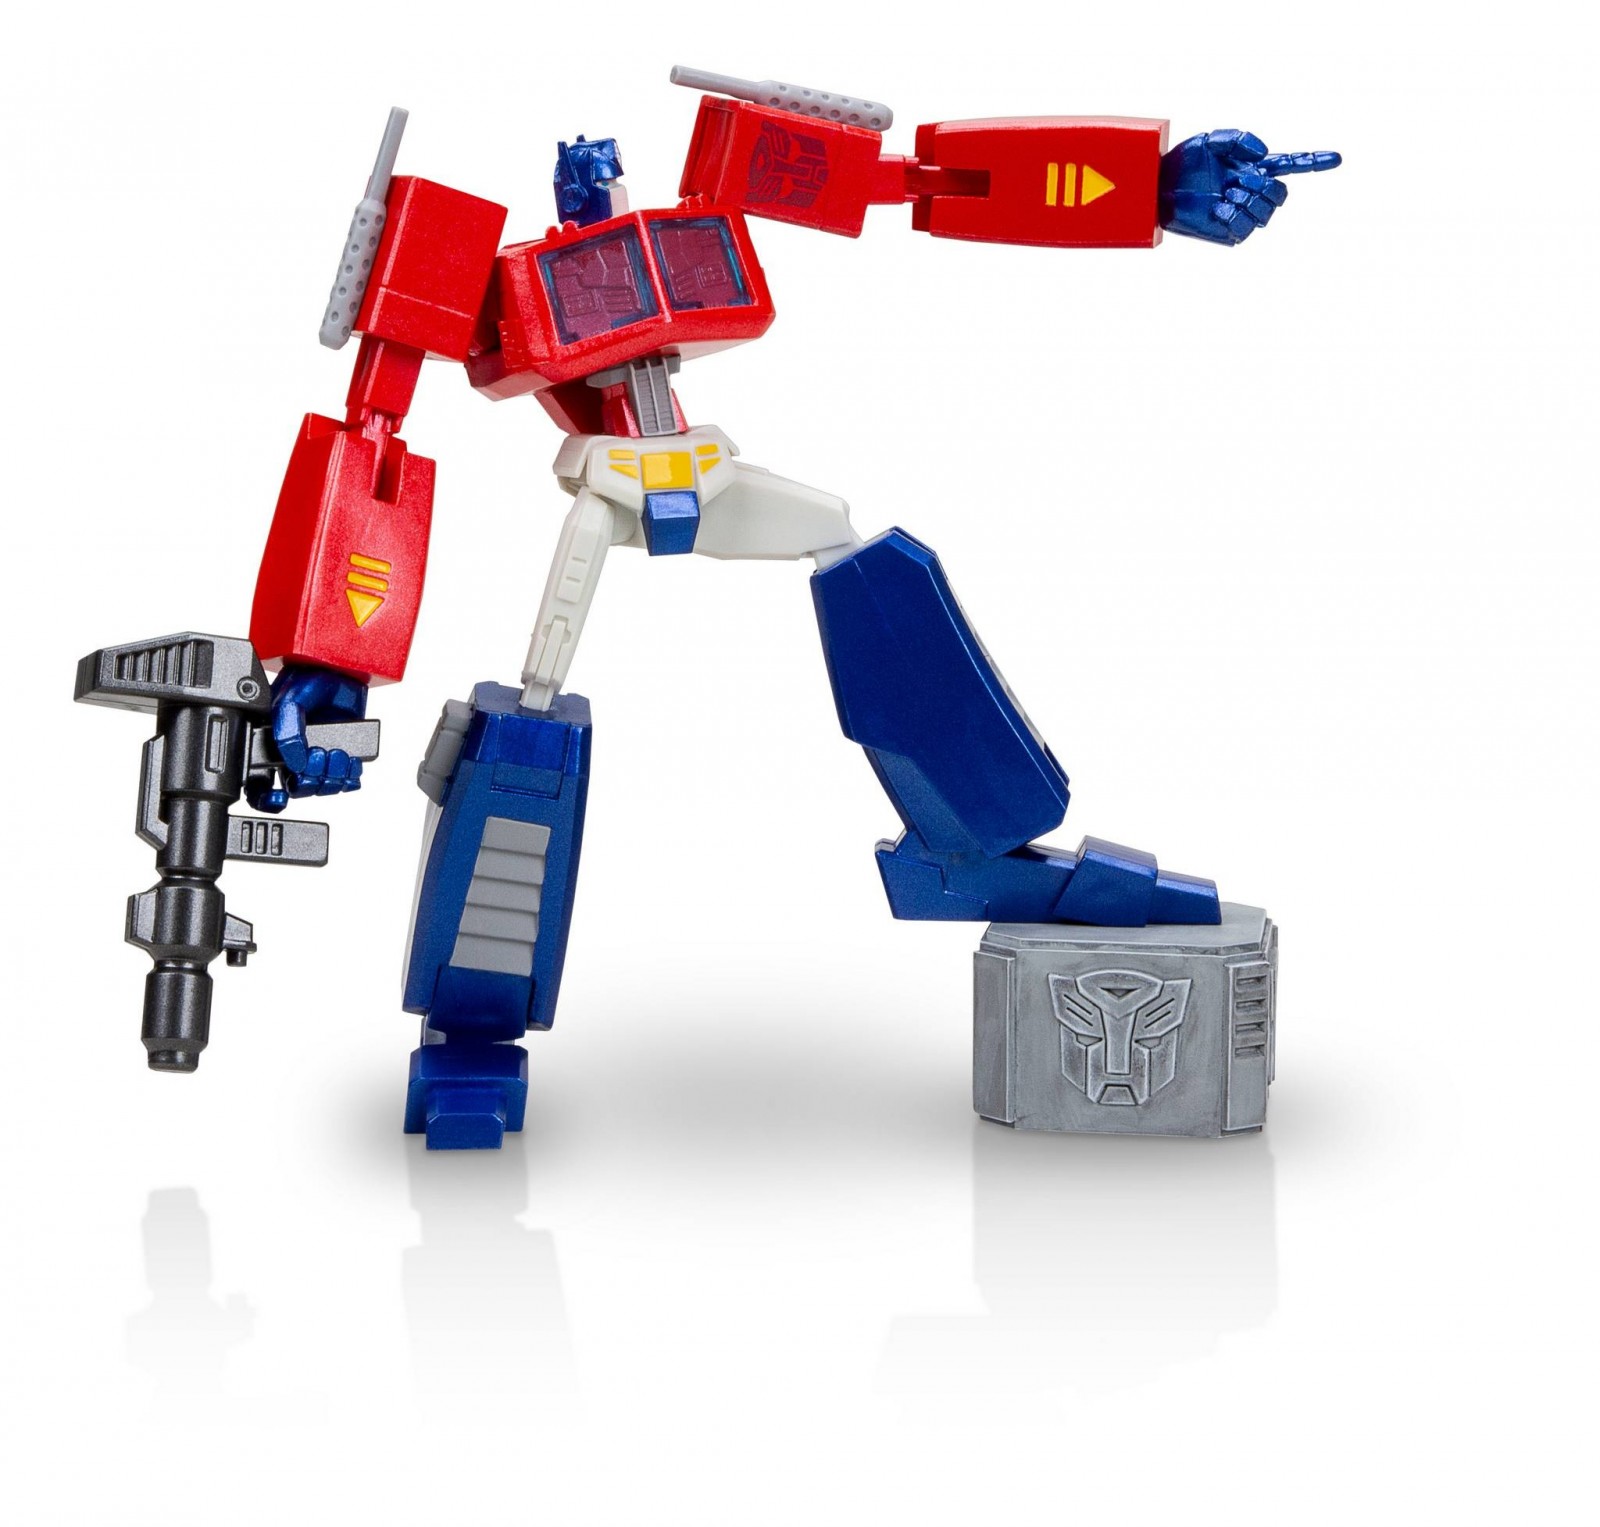 The Oddest Looking G1 Optimus Prime Figure is a Loot Crate